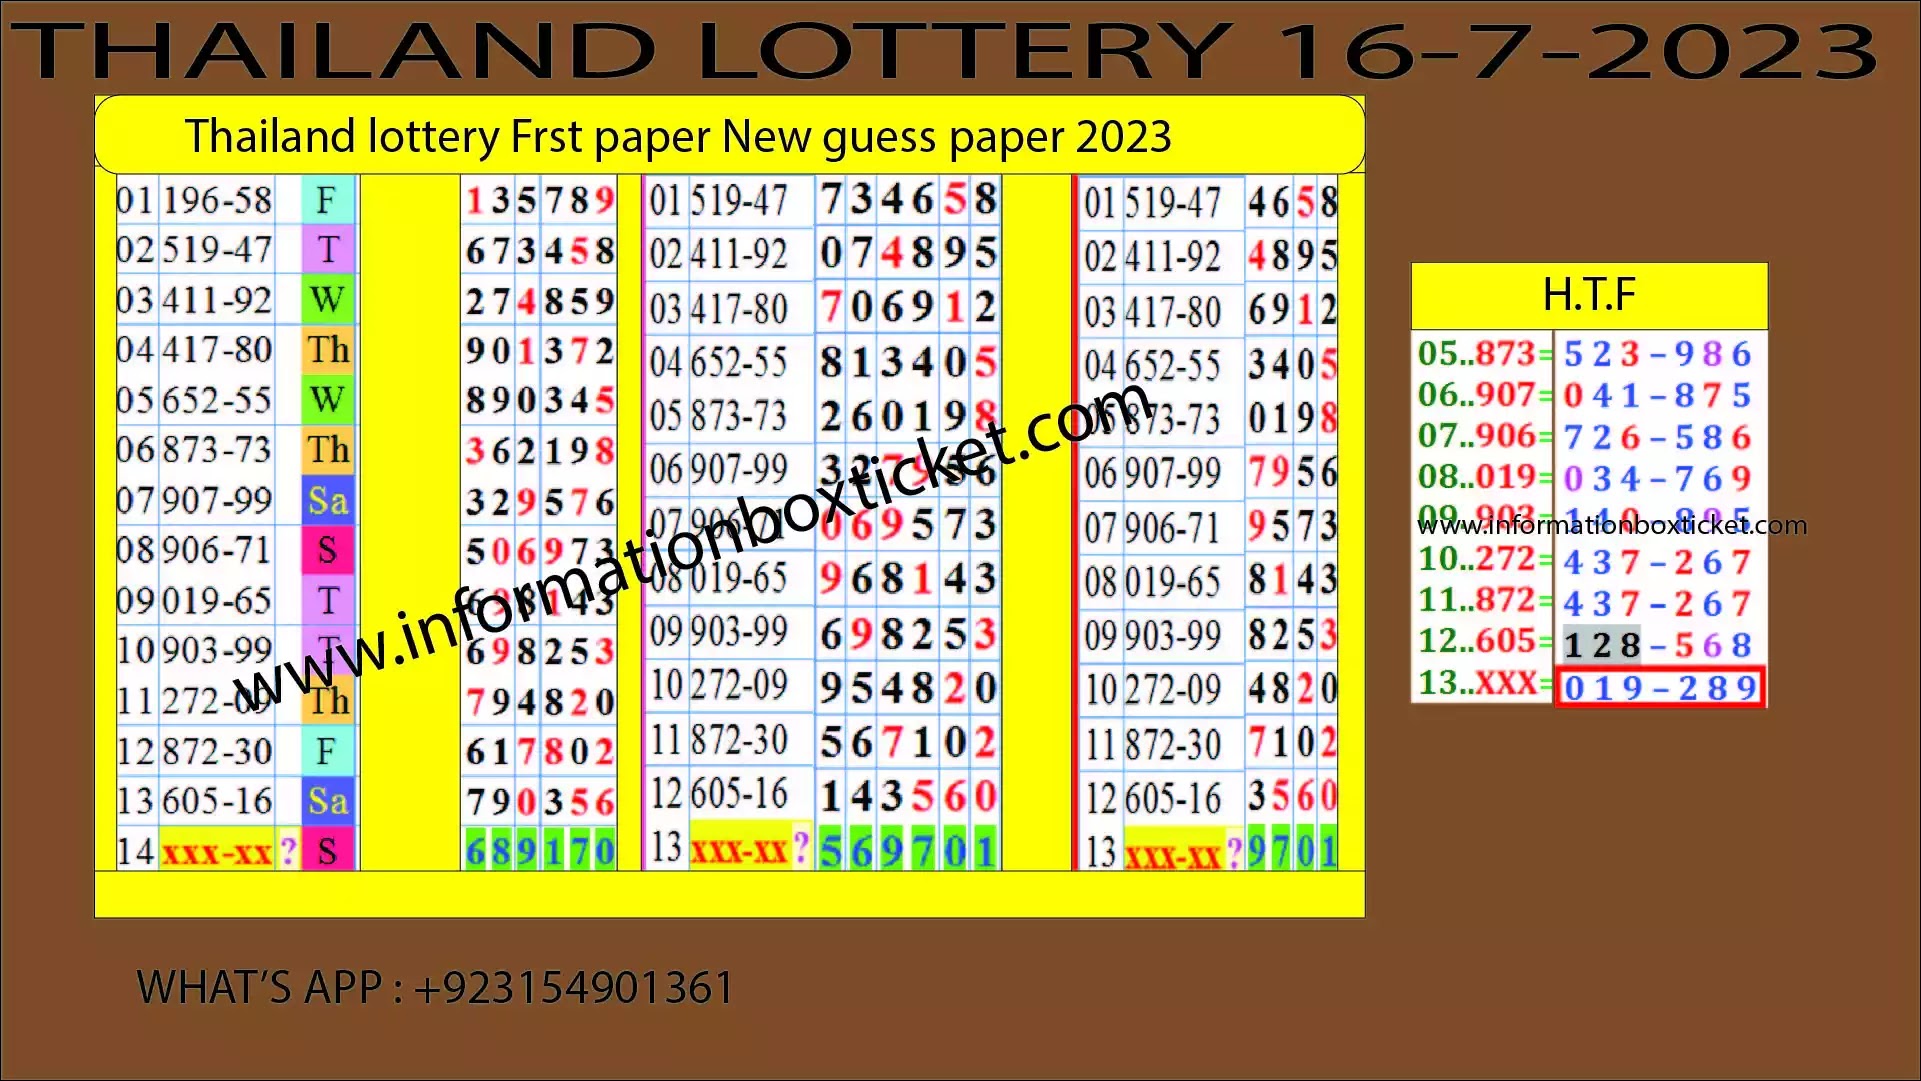 THAILAND  LOTTERY 3UP GUESS PAPER 2023 FOR 16-7-2023 BY, www.thailotteryviptipstricks.com